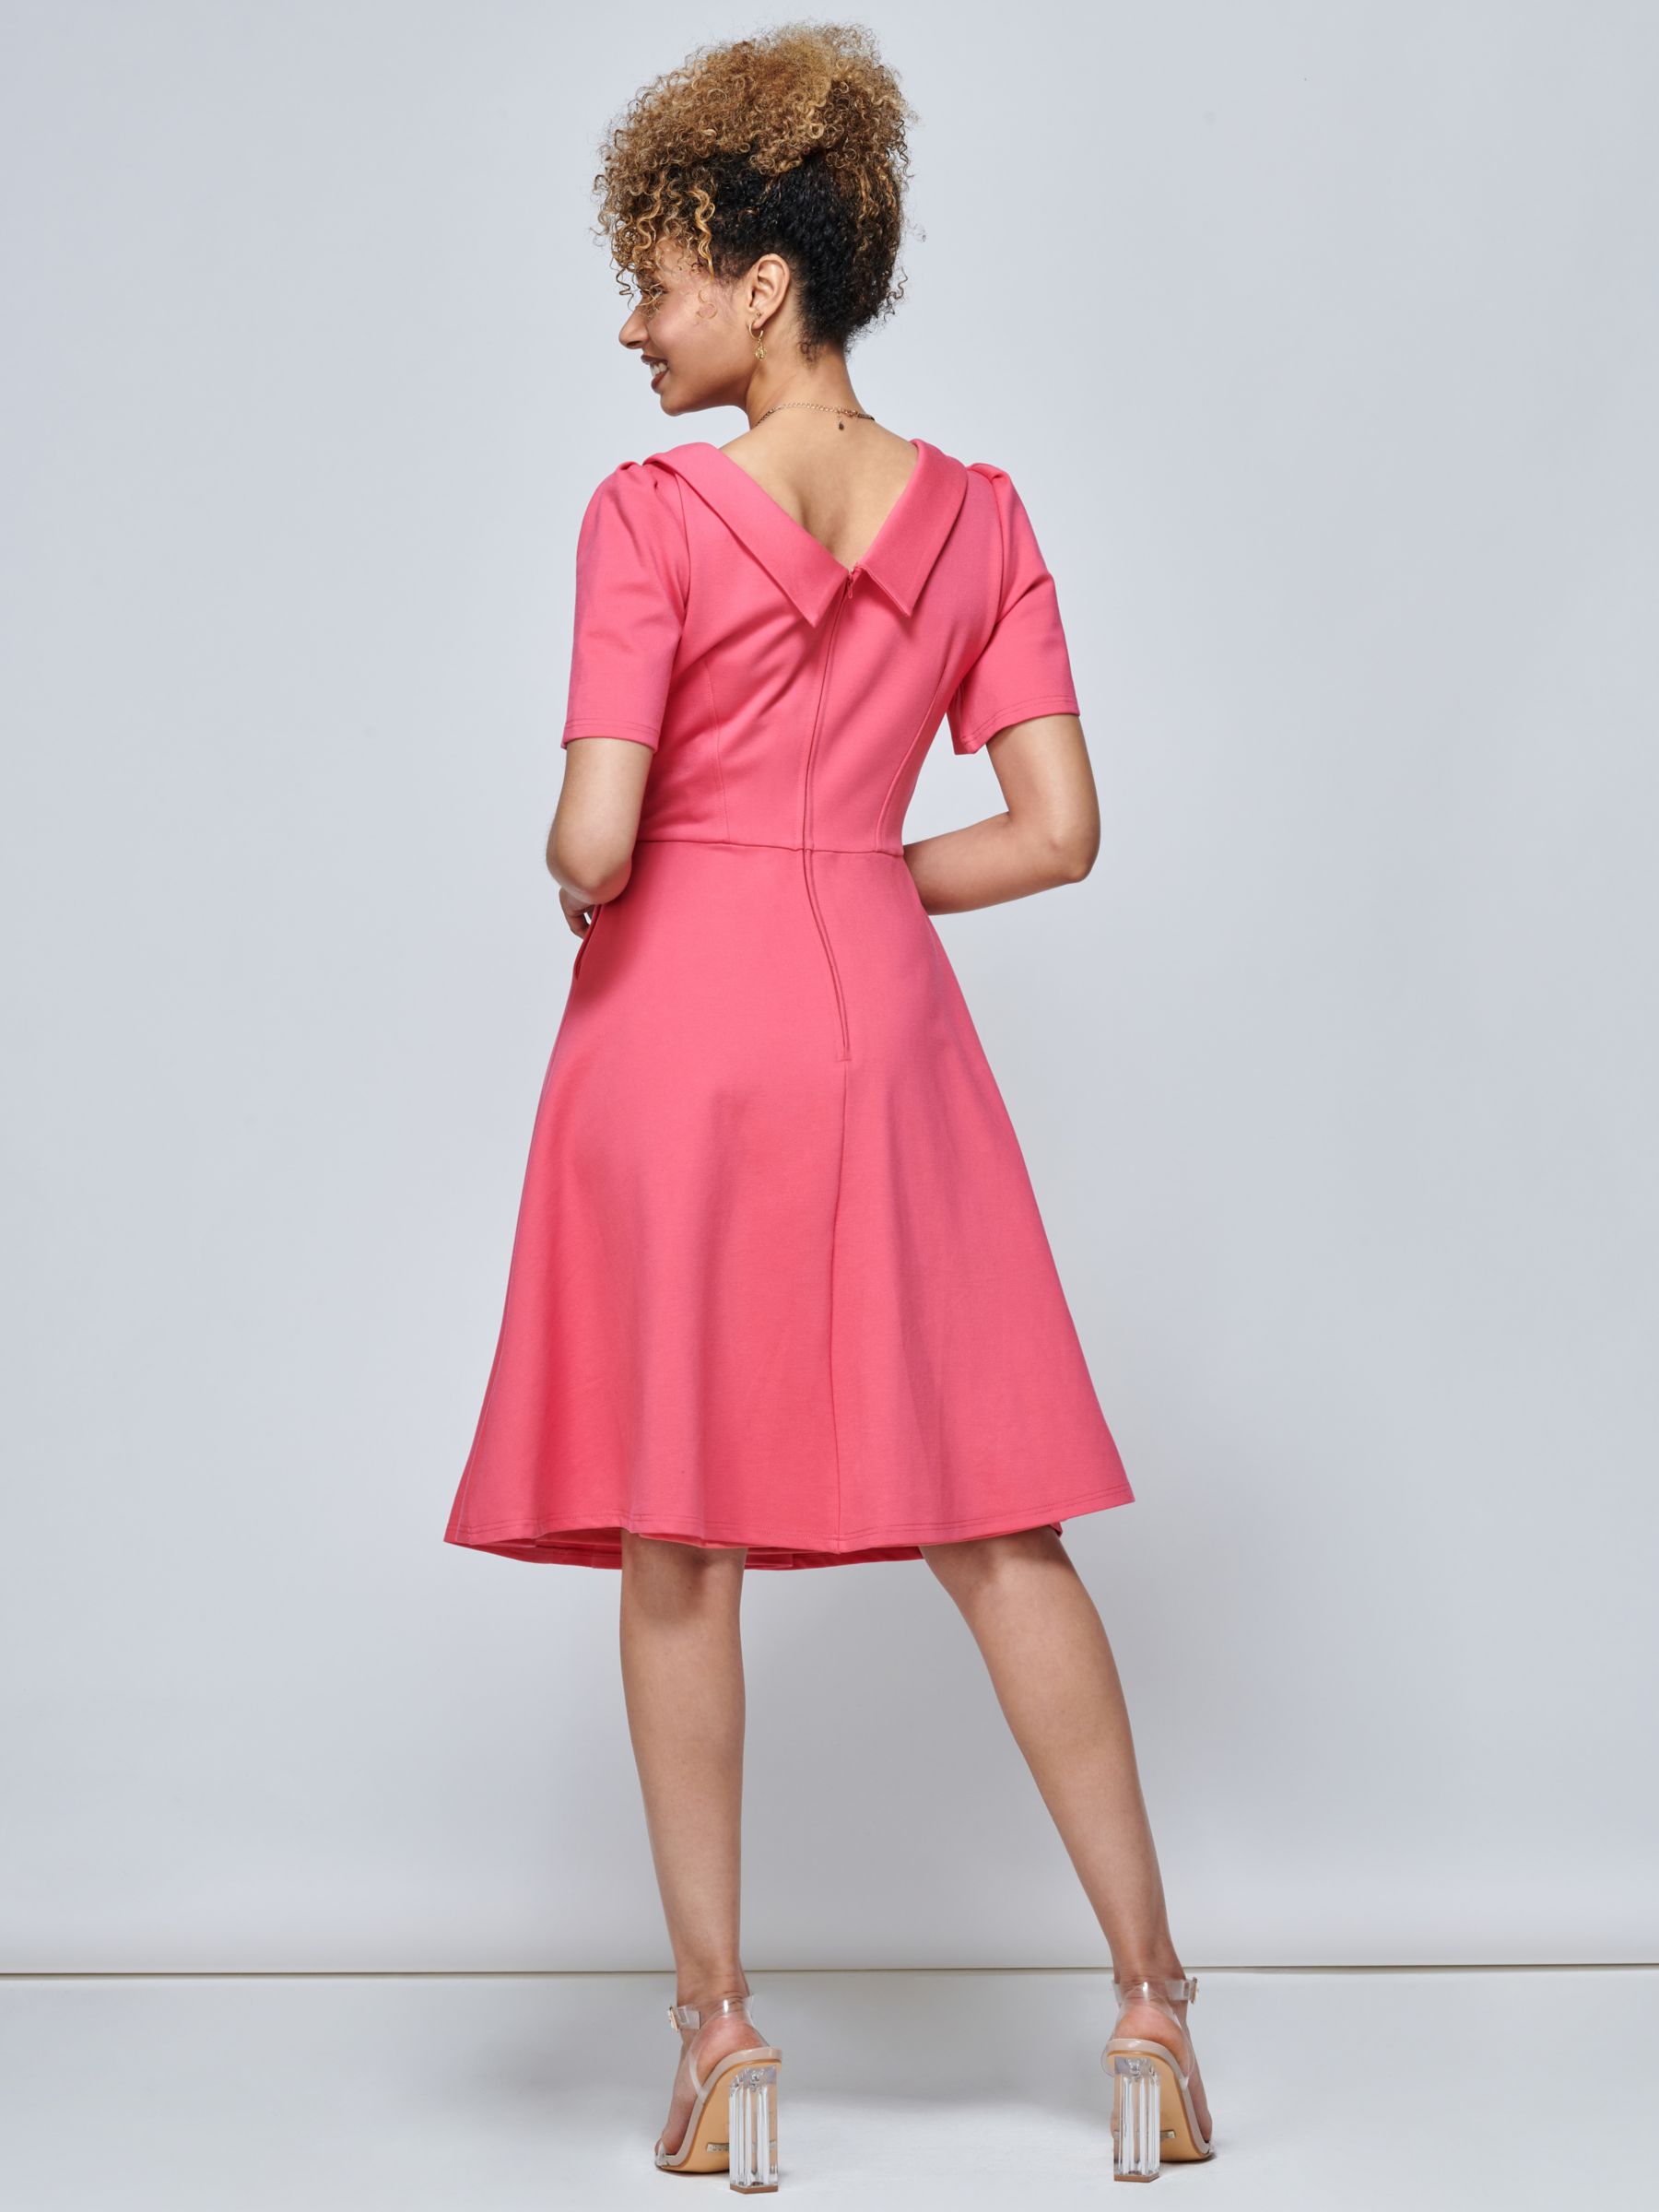 Jolie Moi Valencia Flared Dress, Punch Pink, 8